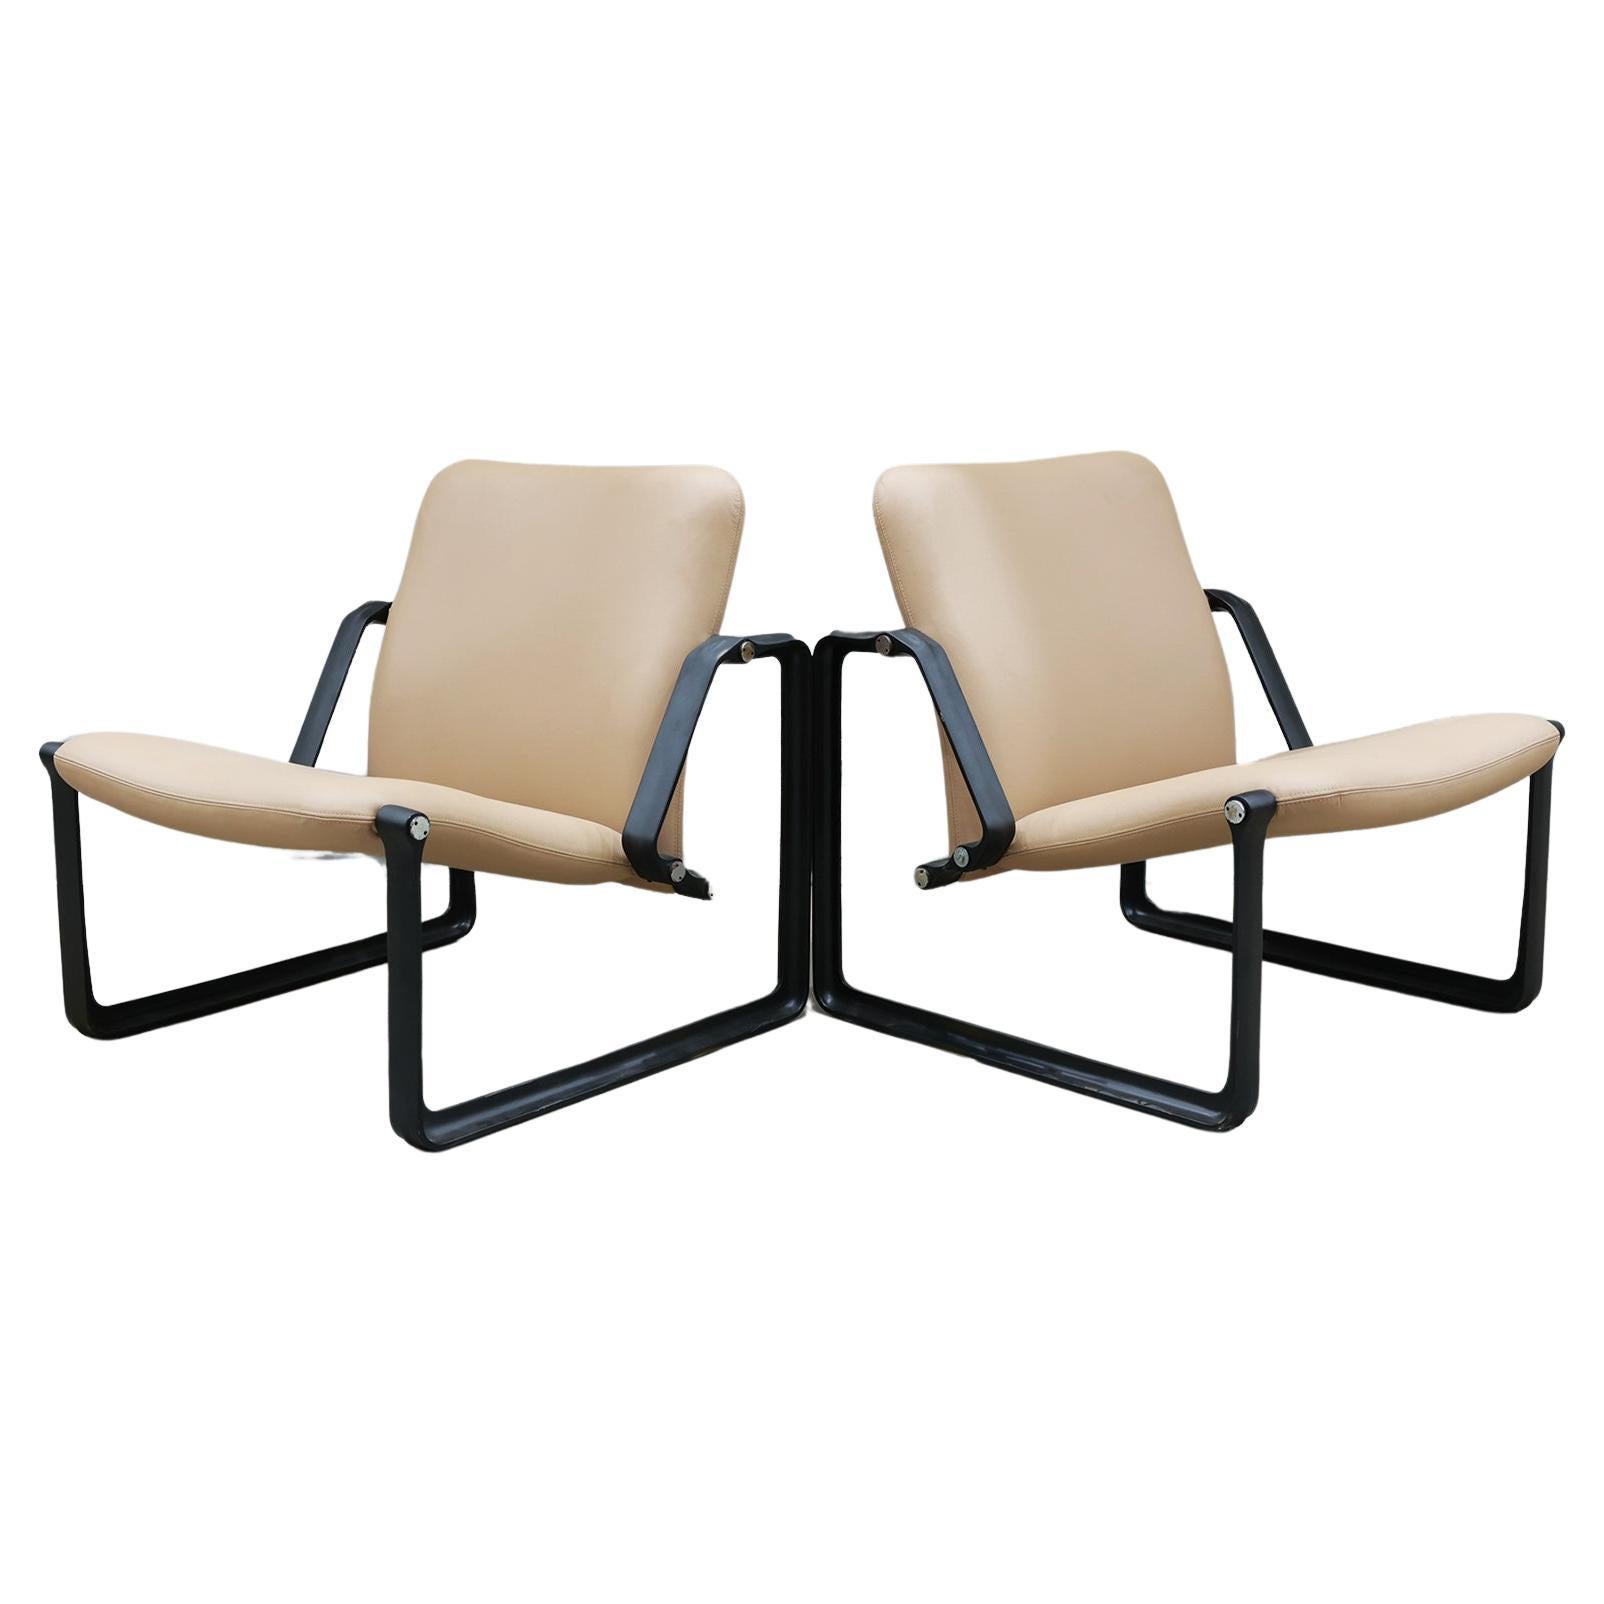 Brazilian Modern “Lobby” armchairs by Jorge Zalszupin in metal and leather, 1970 For Sale